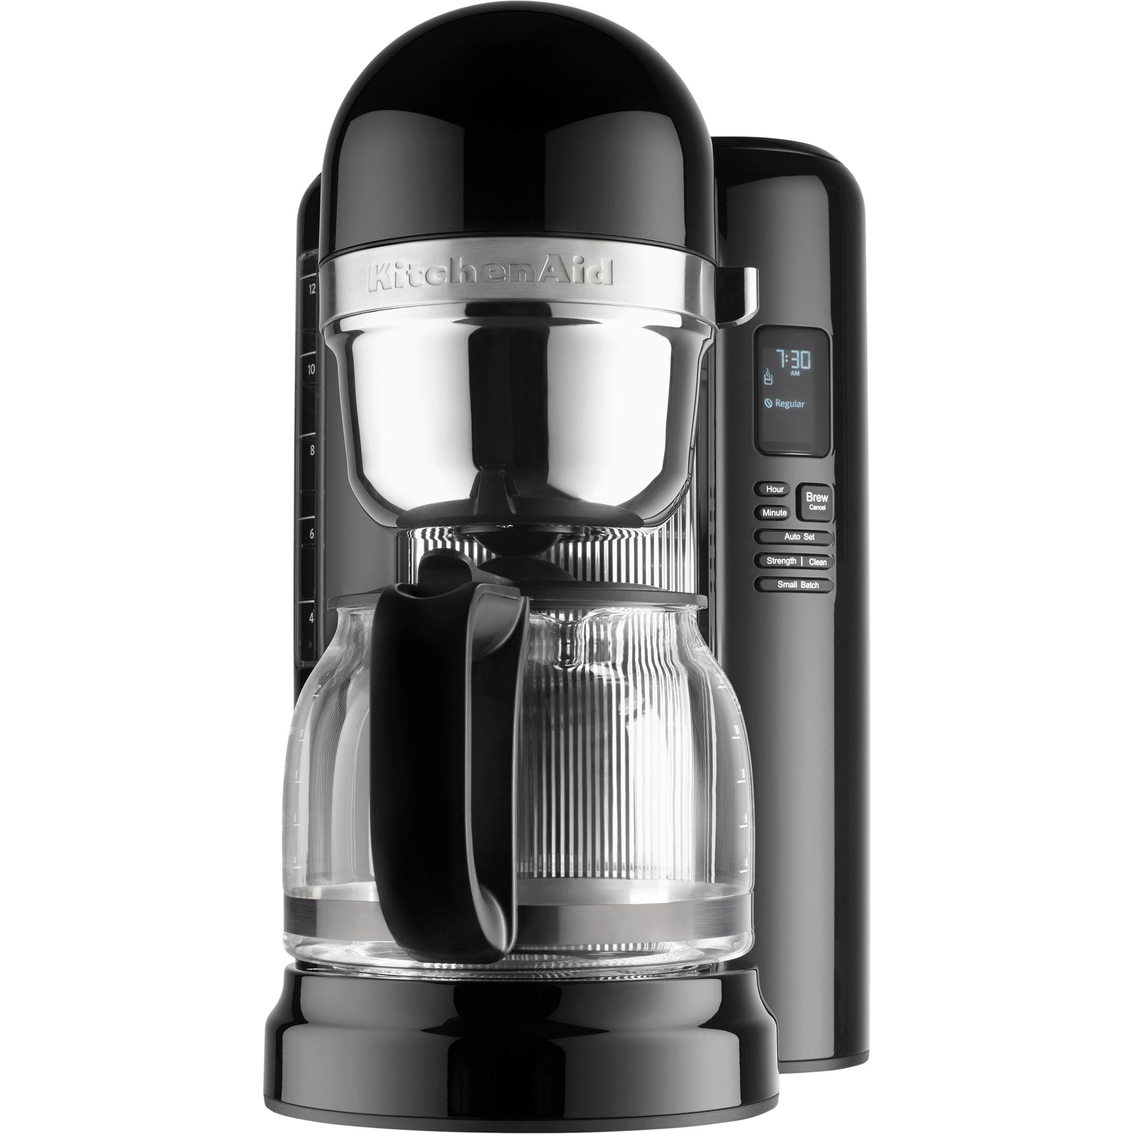 (D) KitchenAid 12 cup Design Series Coffee Maker - Image 2 of 3